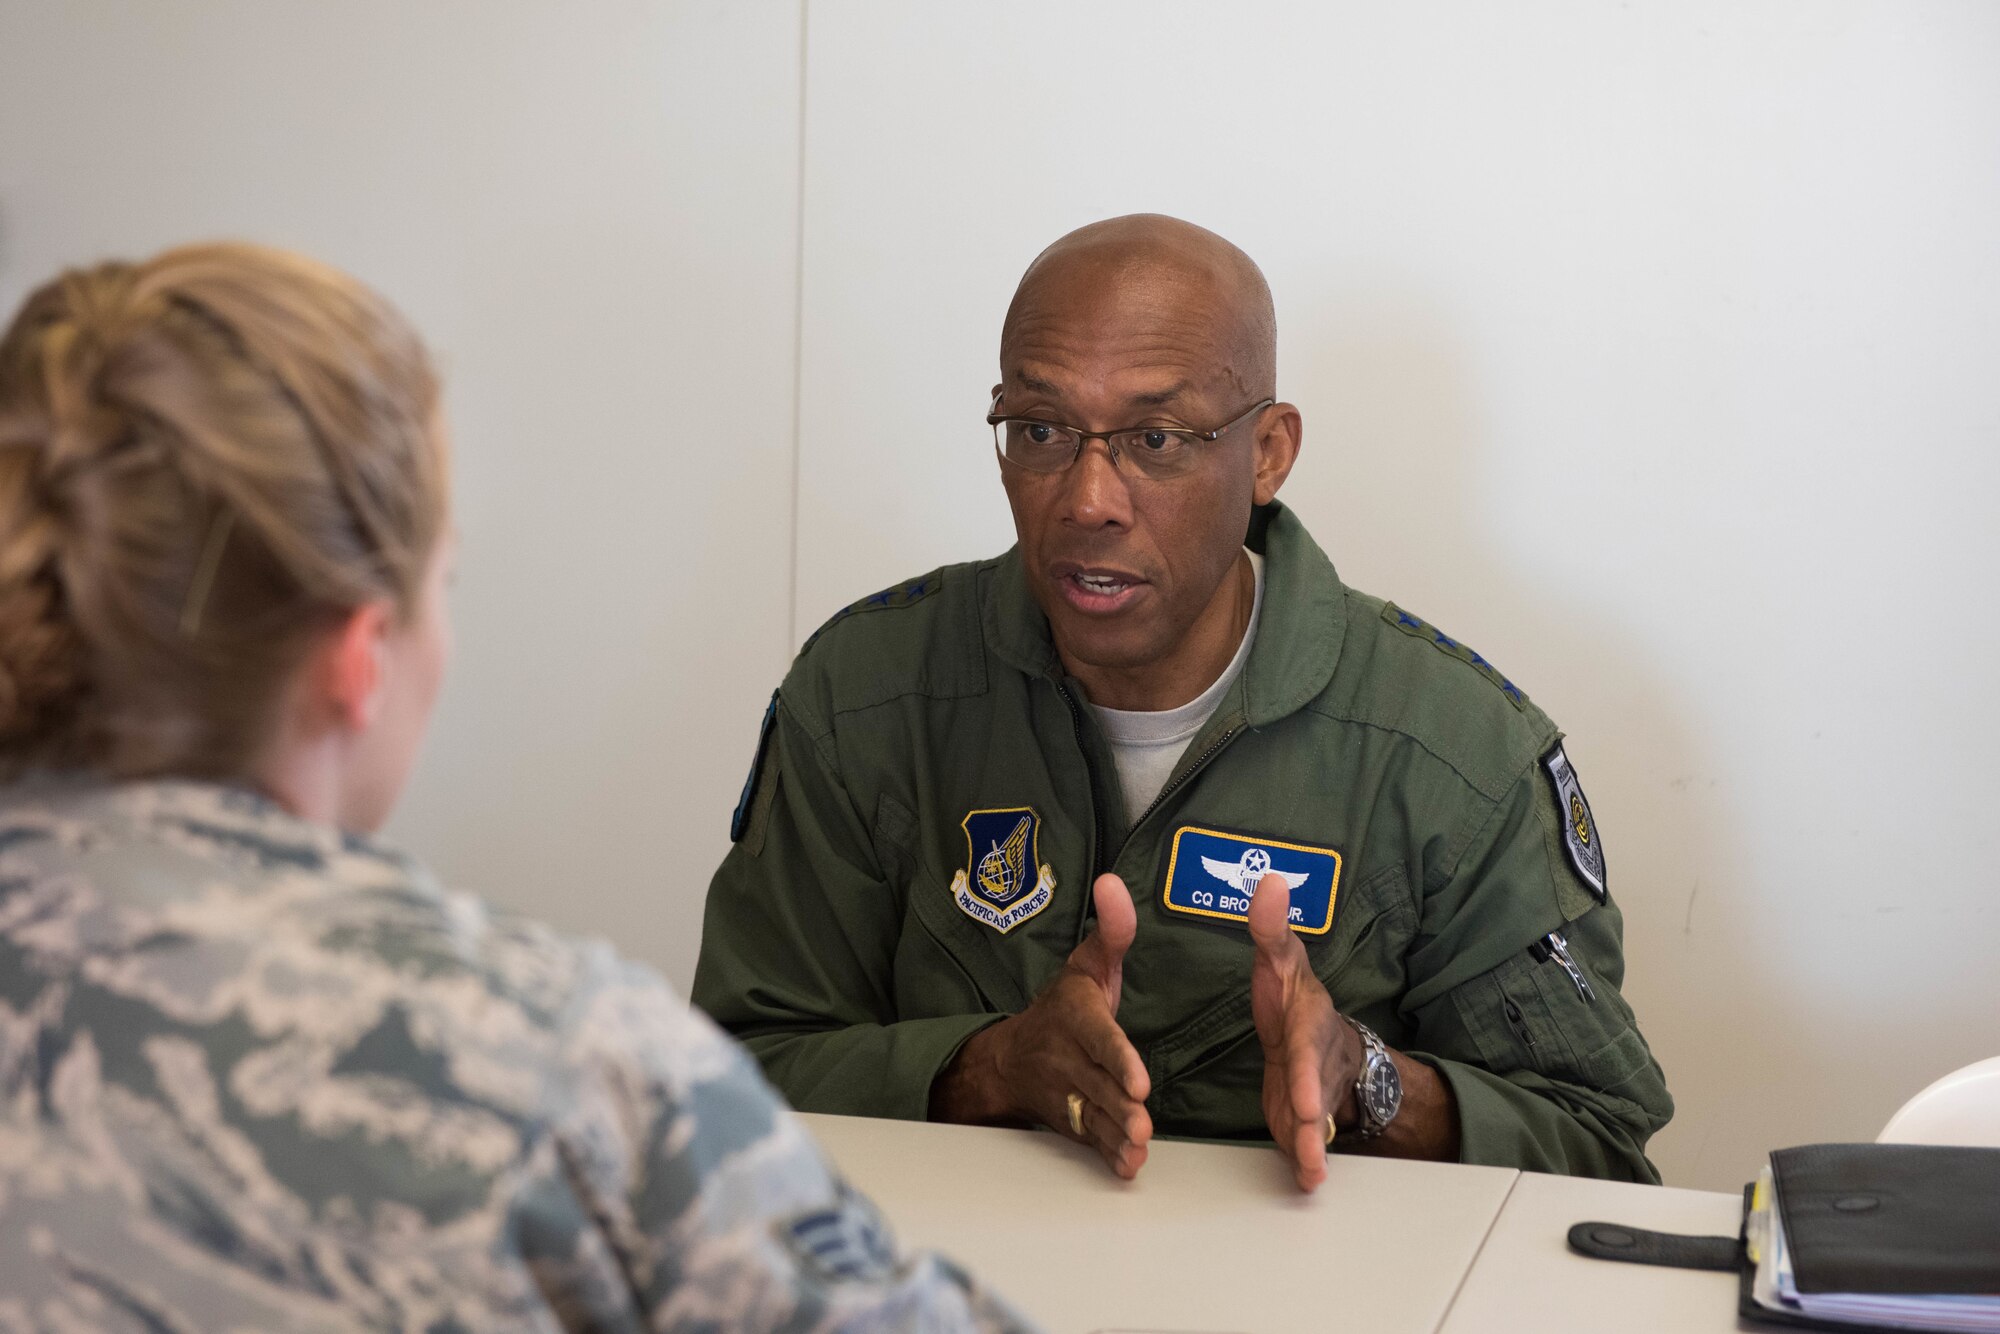 Gen. CQ Brown, Jr., Pacific Air Forces commander, is interviewed by Senior Airman Savannah Waters, 8th Fighter Wing public affairs photojournalist from Kunsan Air Base, Republic of Korea, during Exercise Pitch Black 18 at Royal Australian Air Force Base Darwin, Australia, Aug. 13, 2018. Waters is among the 4,000 personnel representing 16 nations at this year’s biennial multinational large force employment exercise hosted by the RAAF.    (U.S. Air Force photo by Staff Sgt. Hailey Haux)